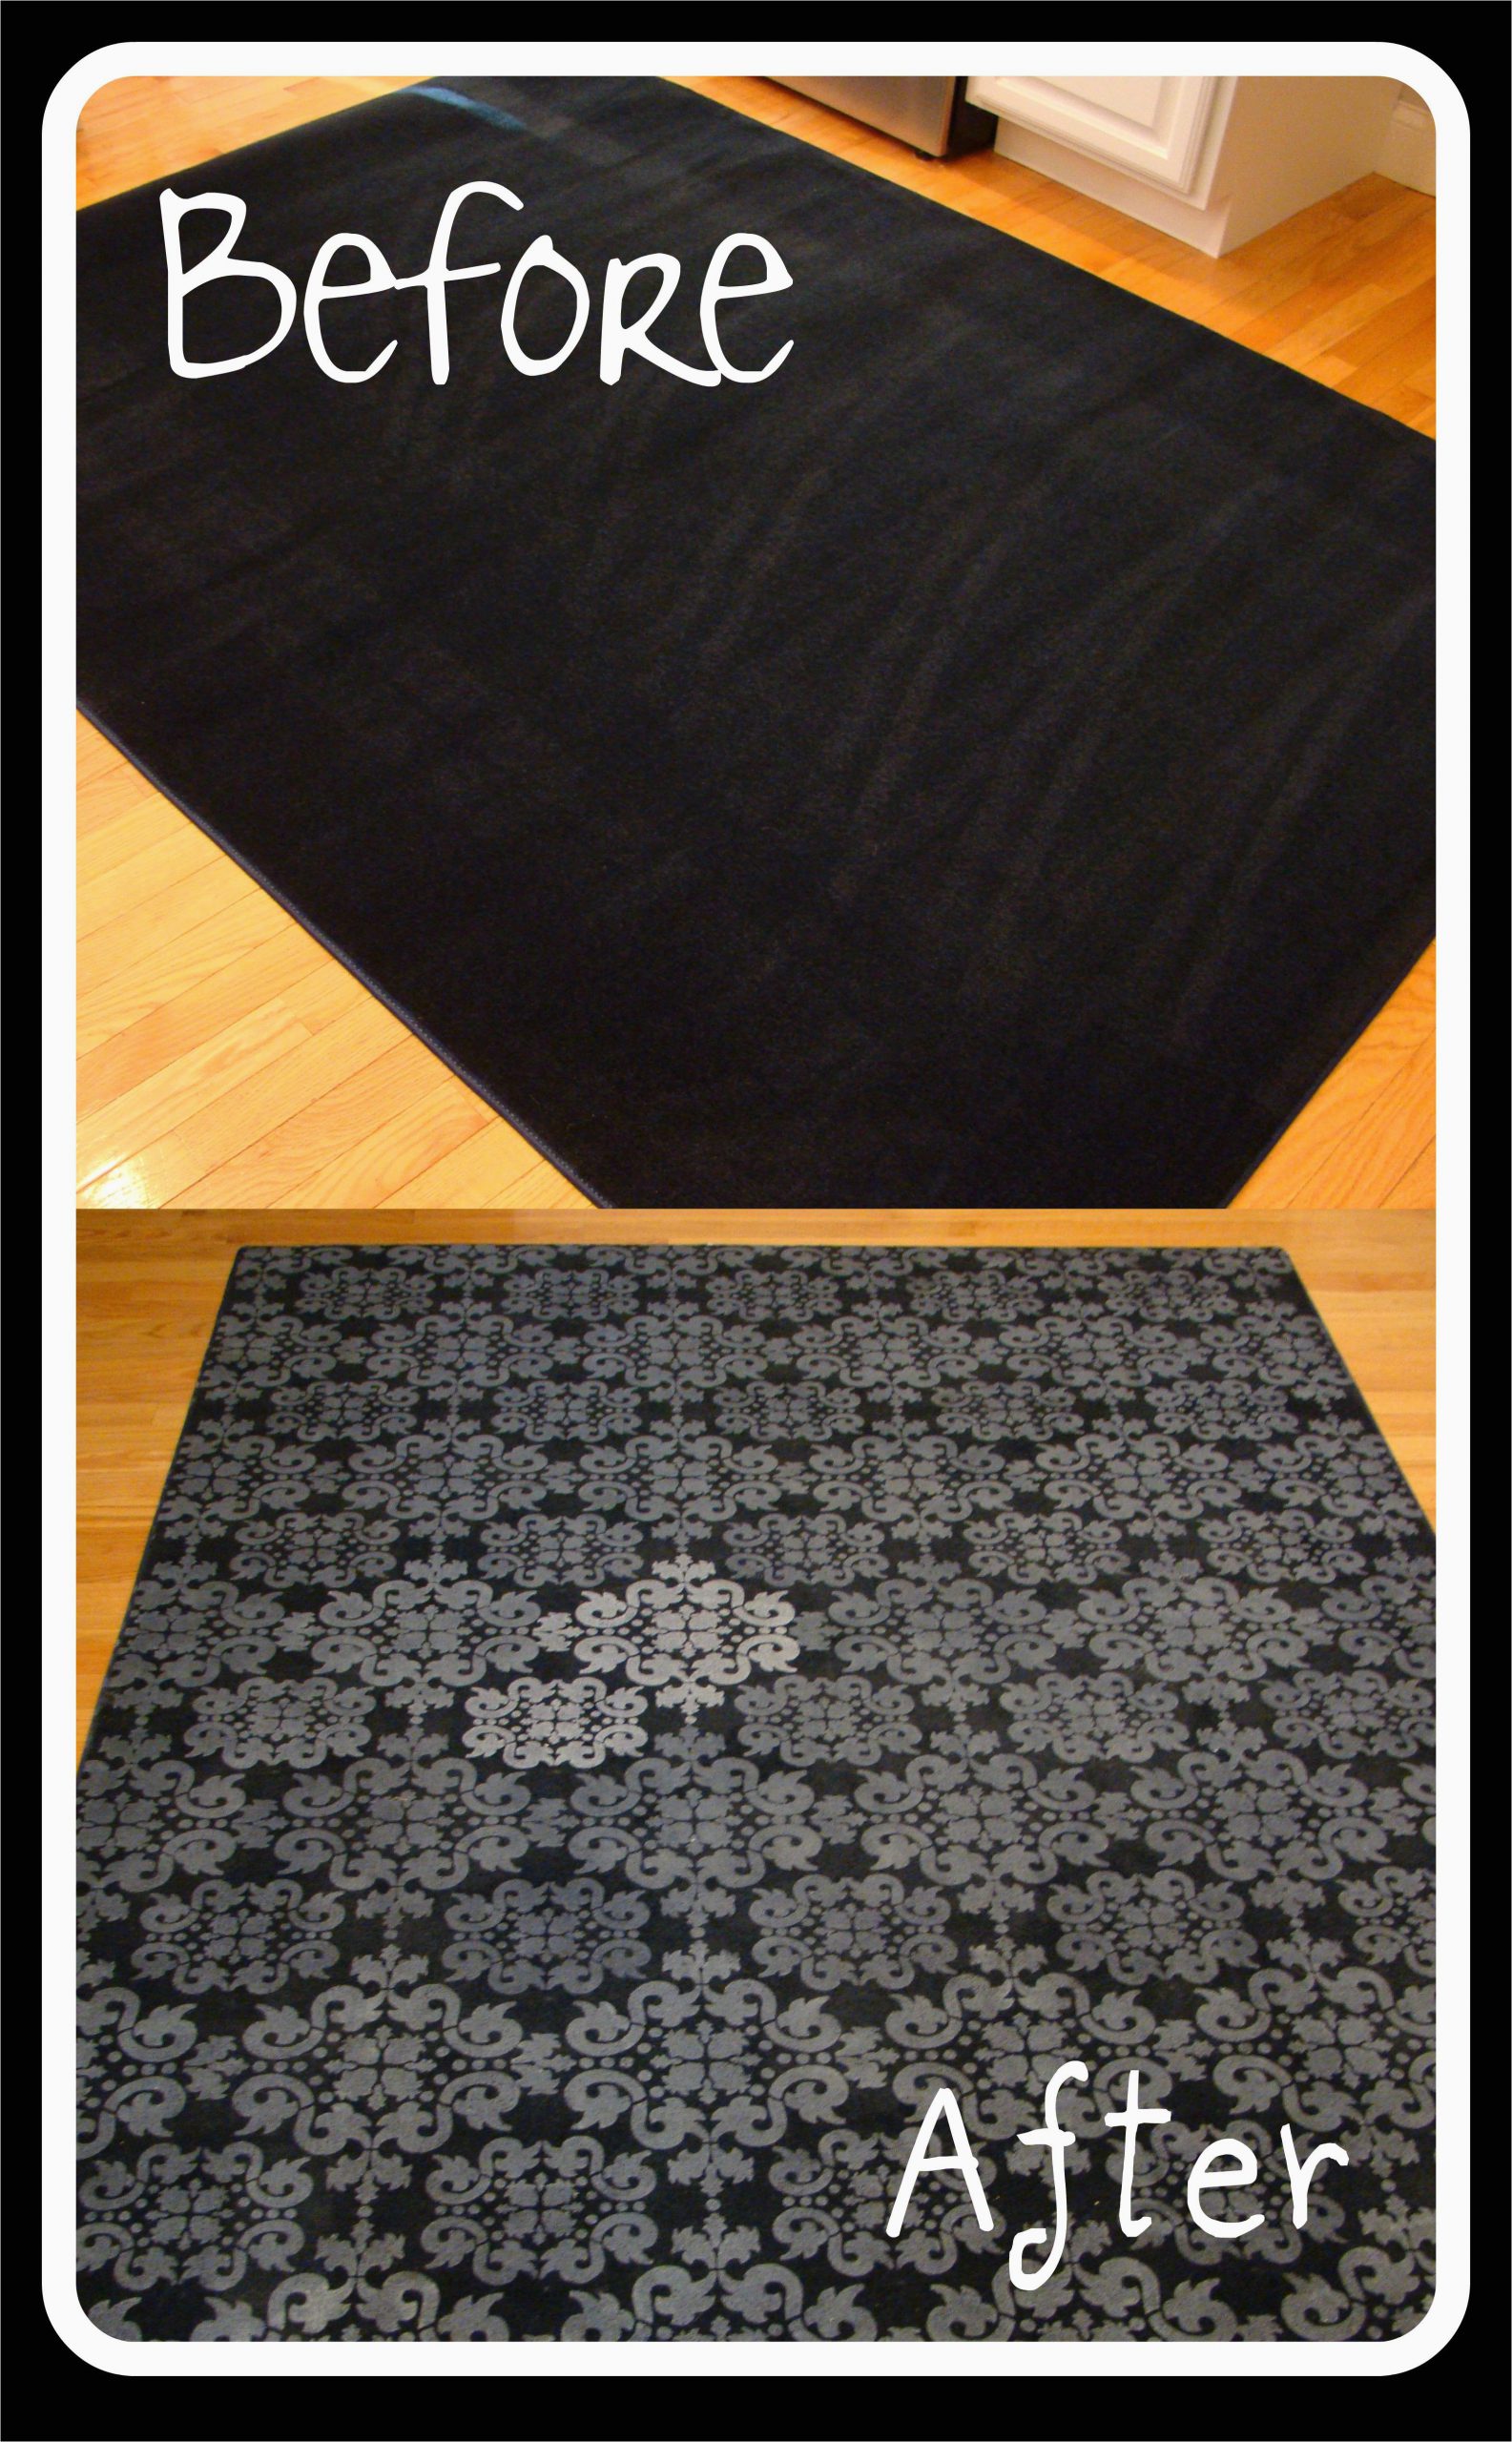 Area Rugs Under 50 Dollars Easy Diy area Rug for Paying $ 50 100 for A Rug Buy A